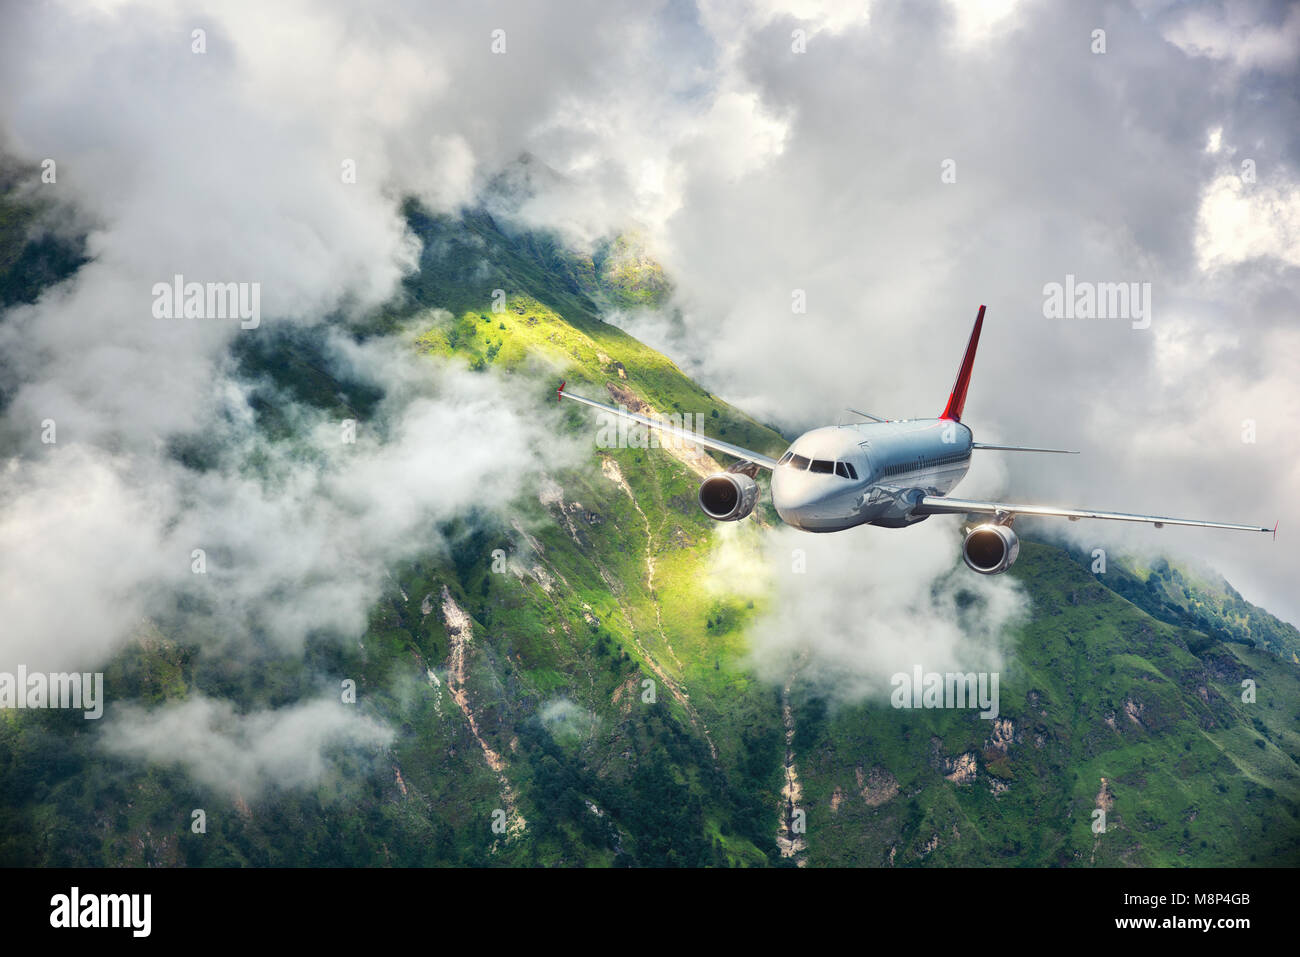 Aerial view of aircraft. Airplane is flying in clouds over mountains with forest at sunset. Landscape with passenger airplane, cloudy sky, trees. Pass Stock Photo